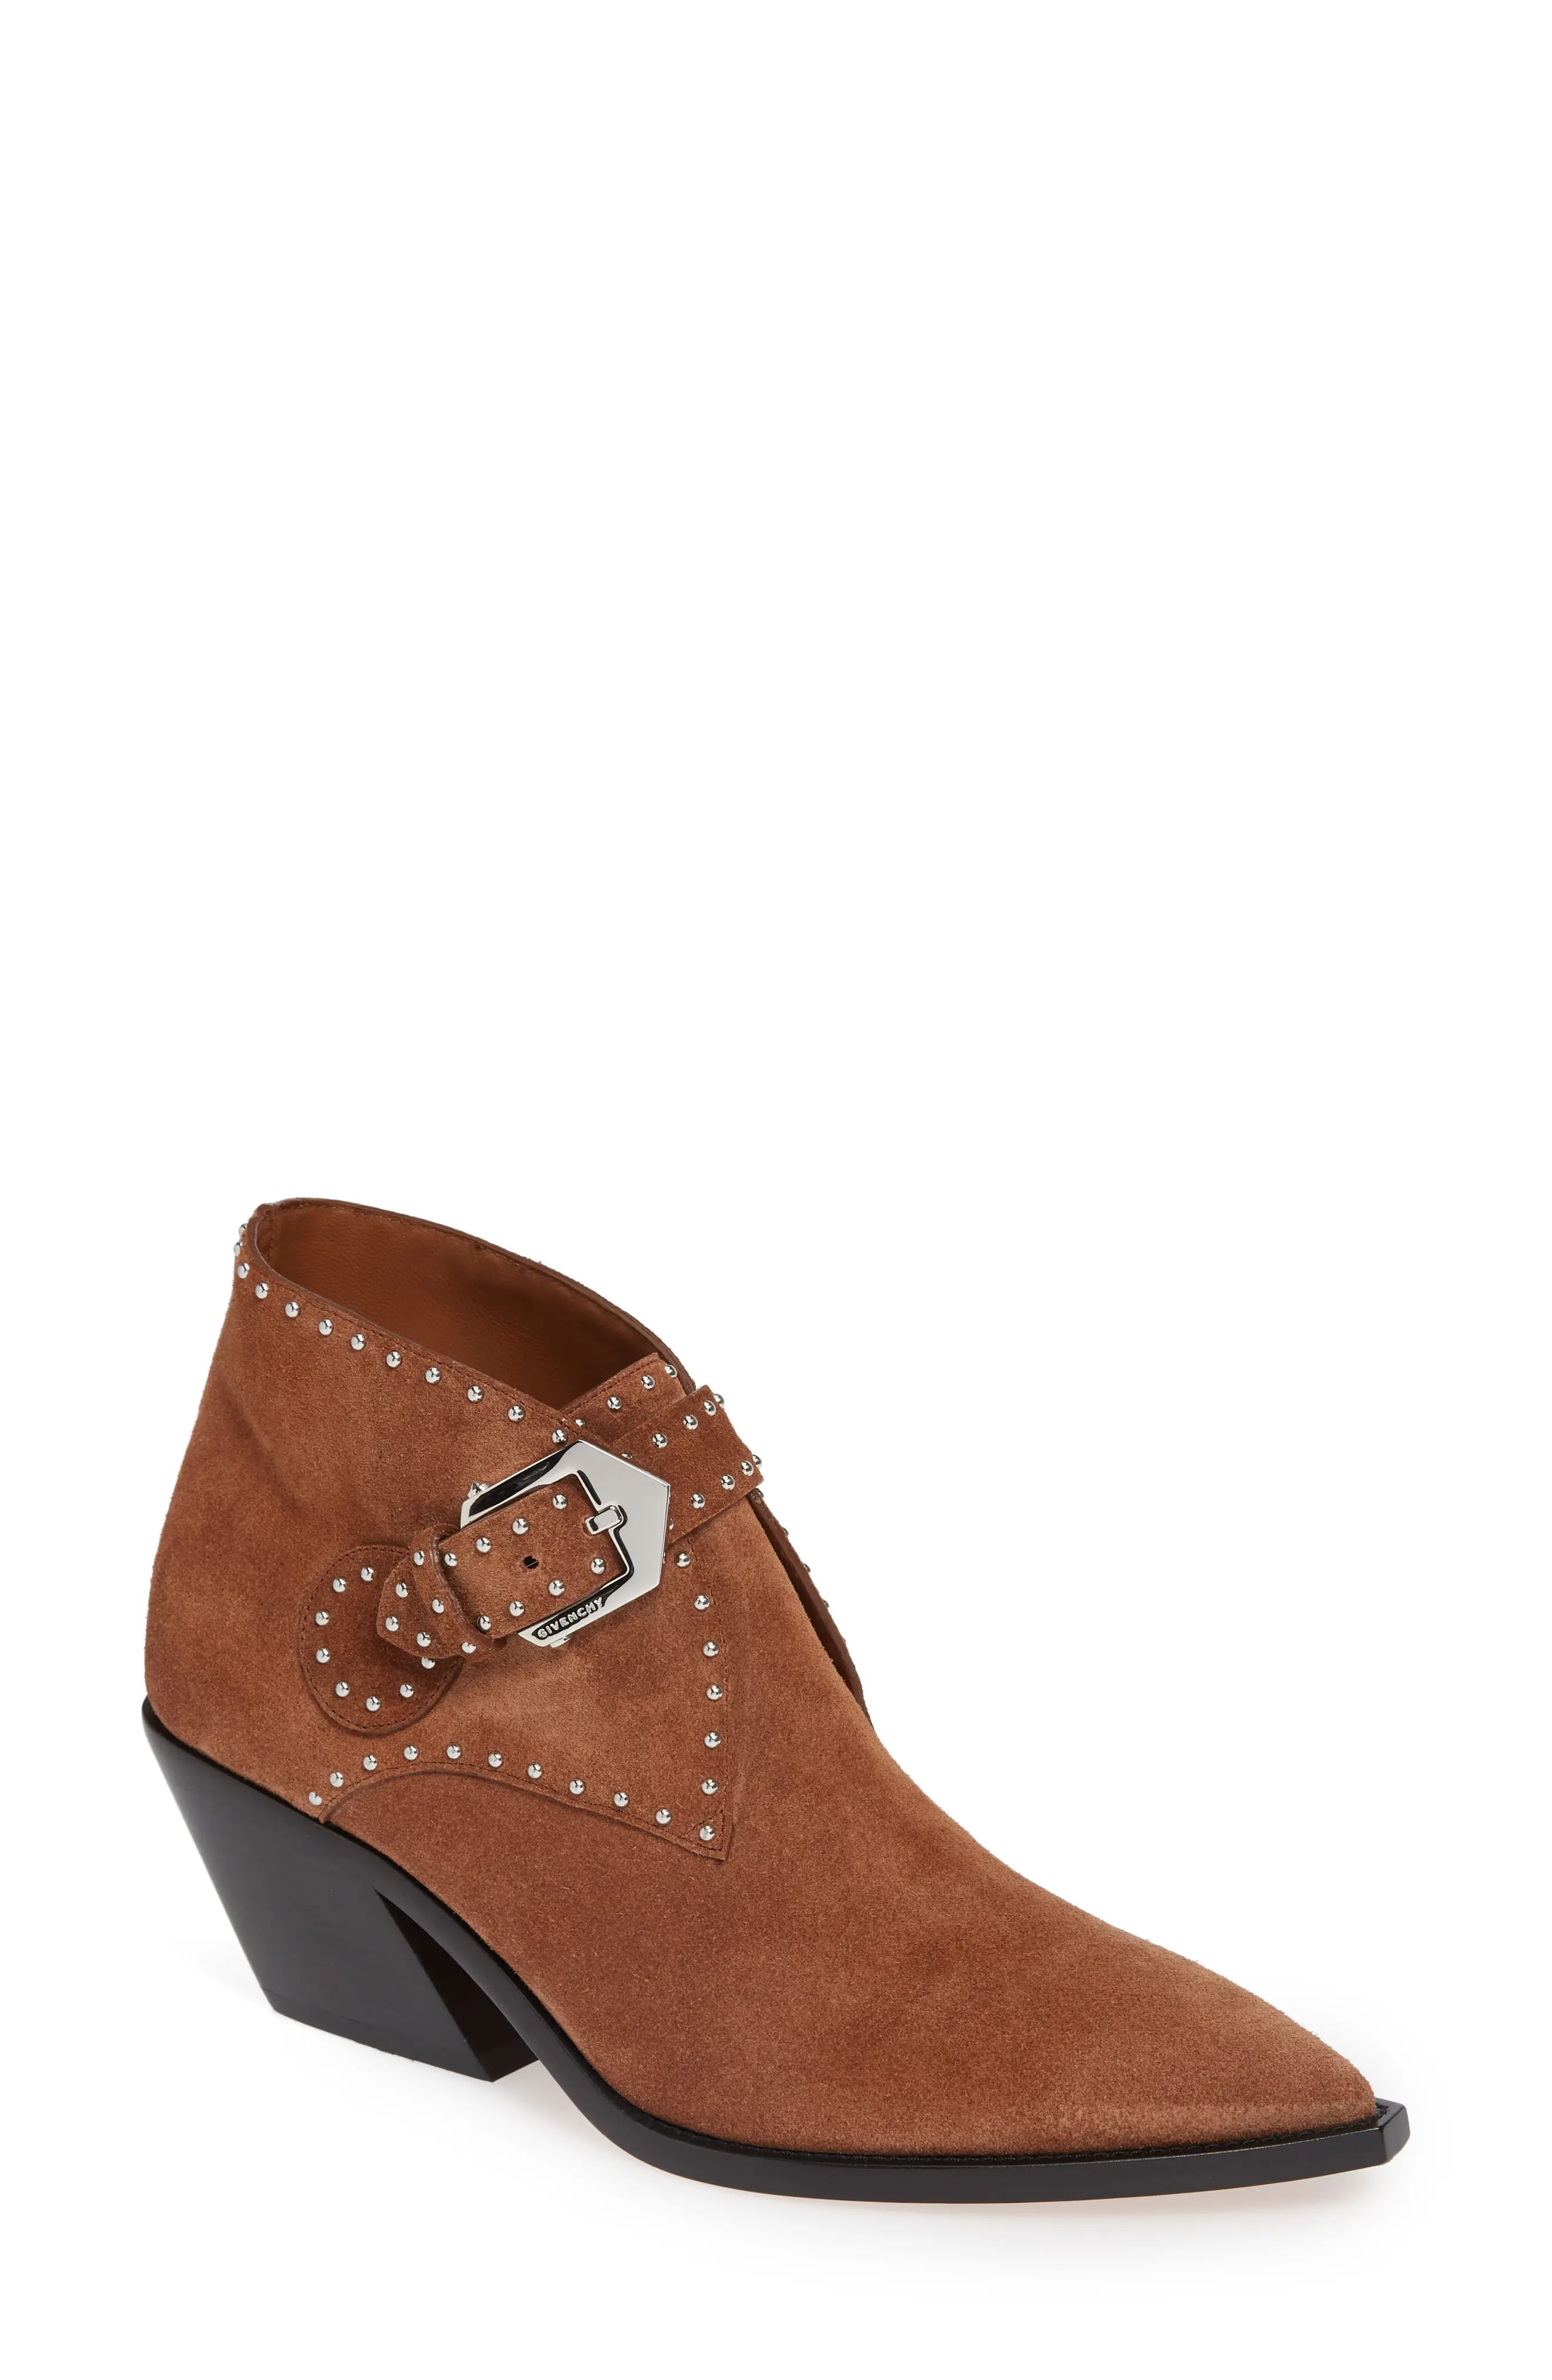 Givenchy Elegant Studs Pointy Toe Boot (Women) | Nordstrom